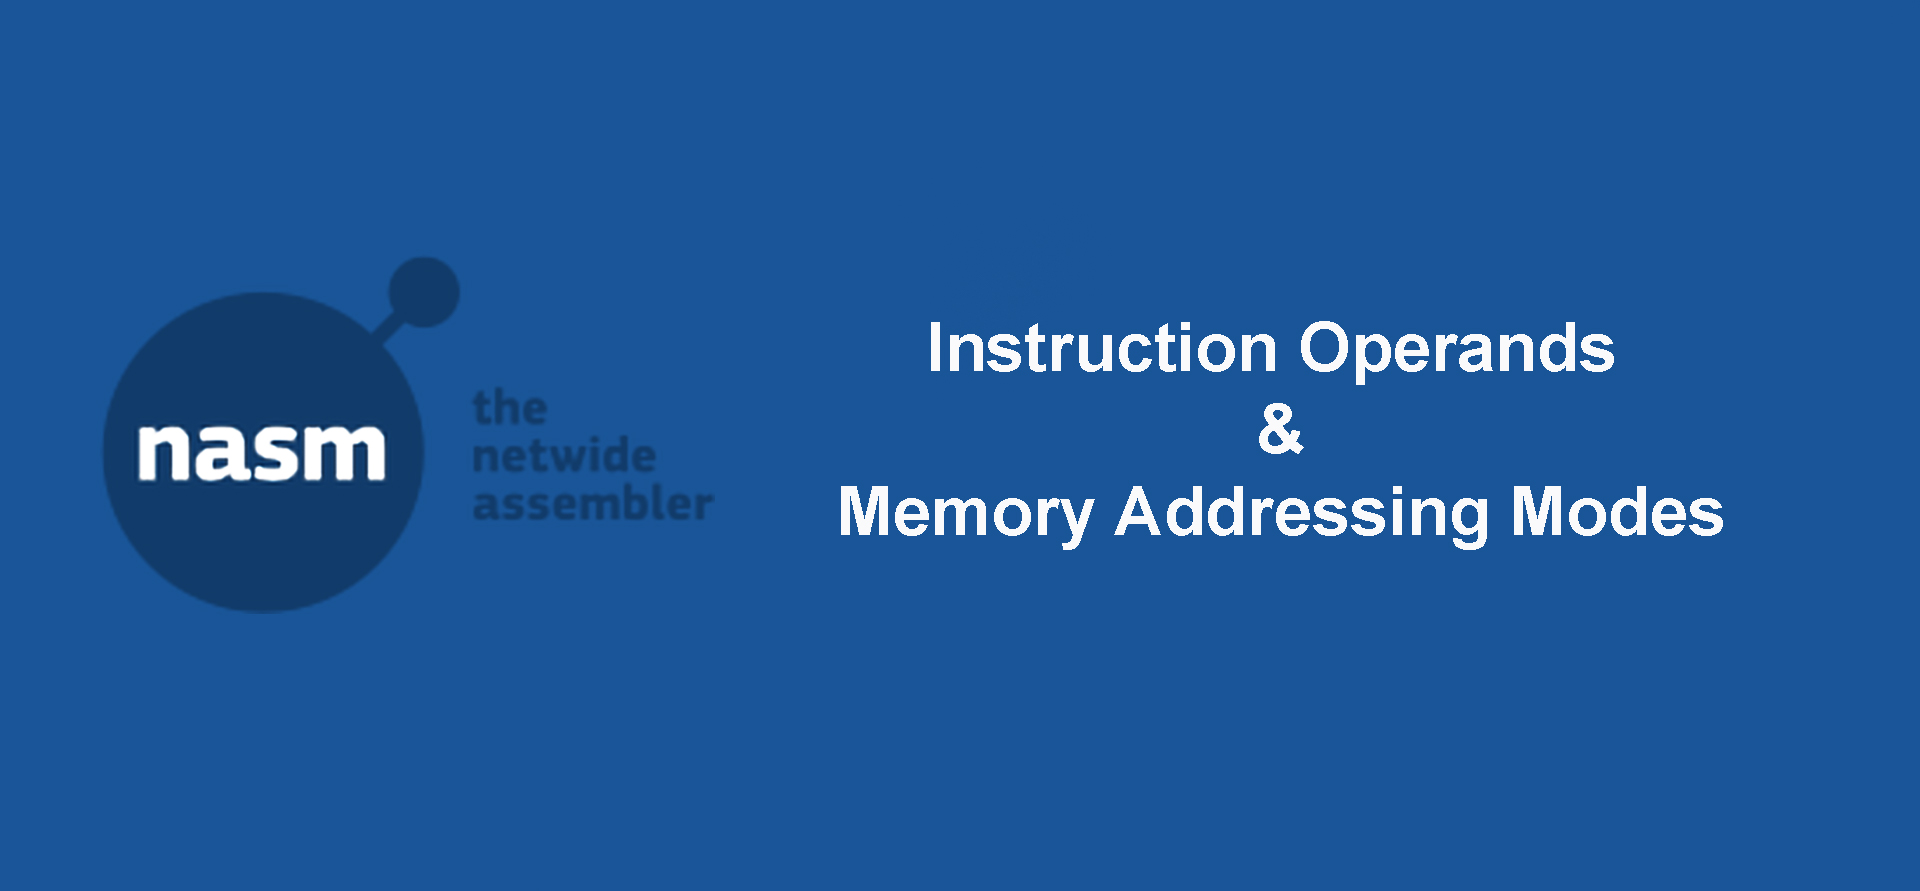 Instruction Operands and Memory Addressing Modes in NASM 32-bit